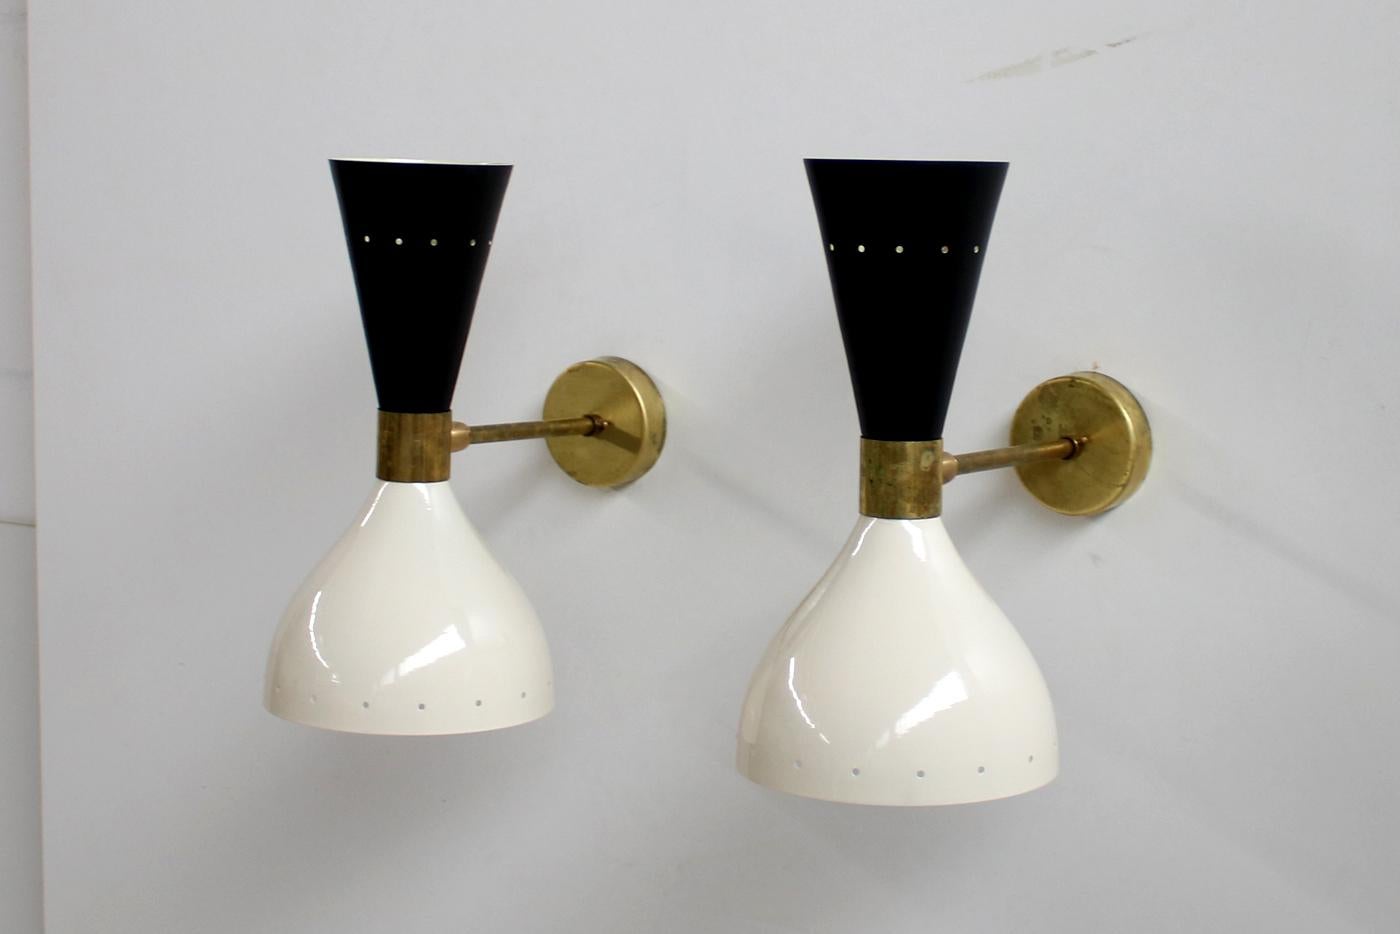 Beautiful pair of Italian sconces, the lampshades are adjustable and can light in different directions, every lampshade is for one large bulb and a small bulb, they can be used with both bulbs or only with one.
Beautiful design and beautiful light.